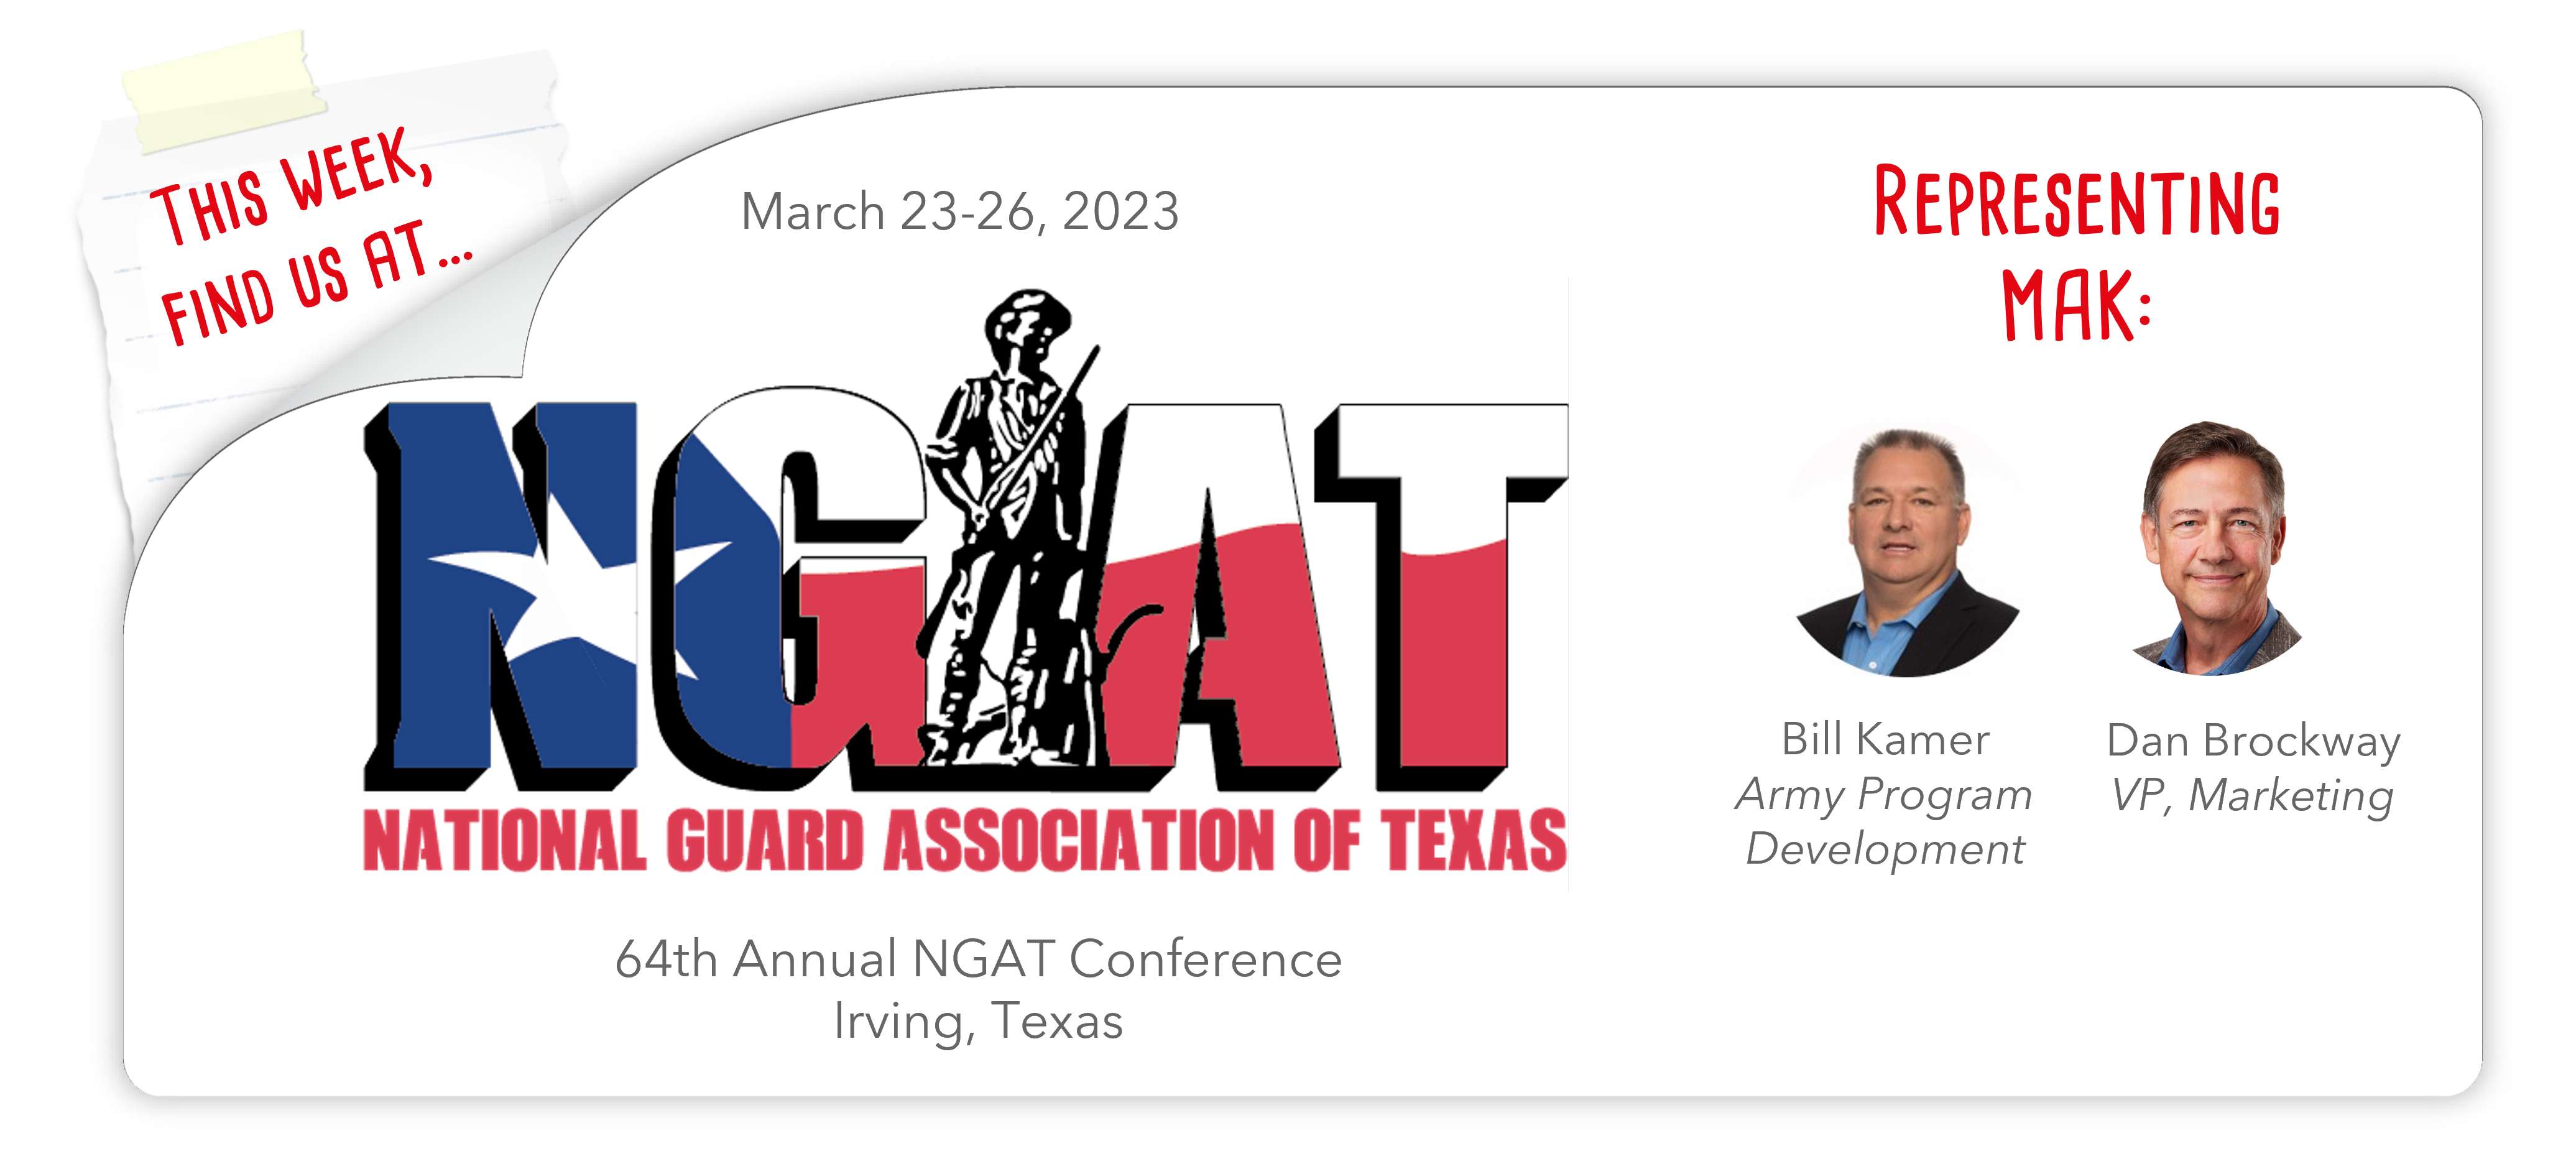 Upcoming Events - National Guard Association of Texas